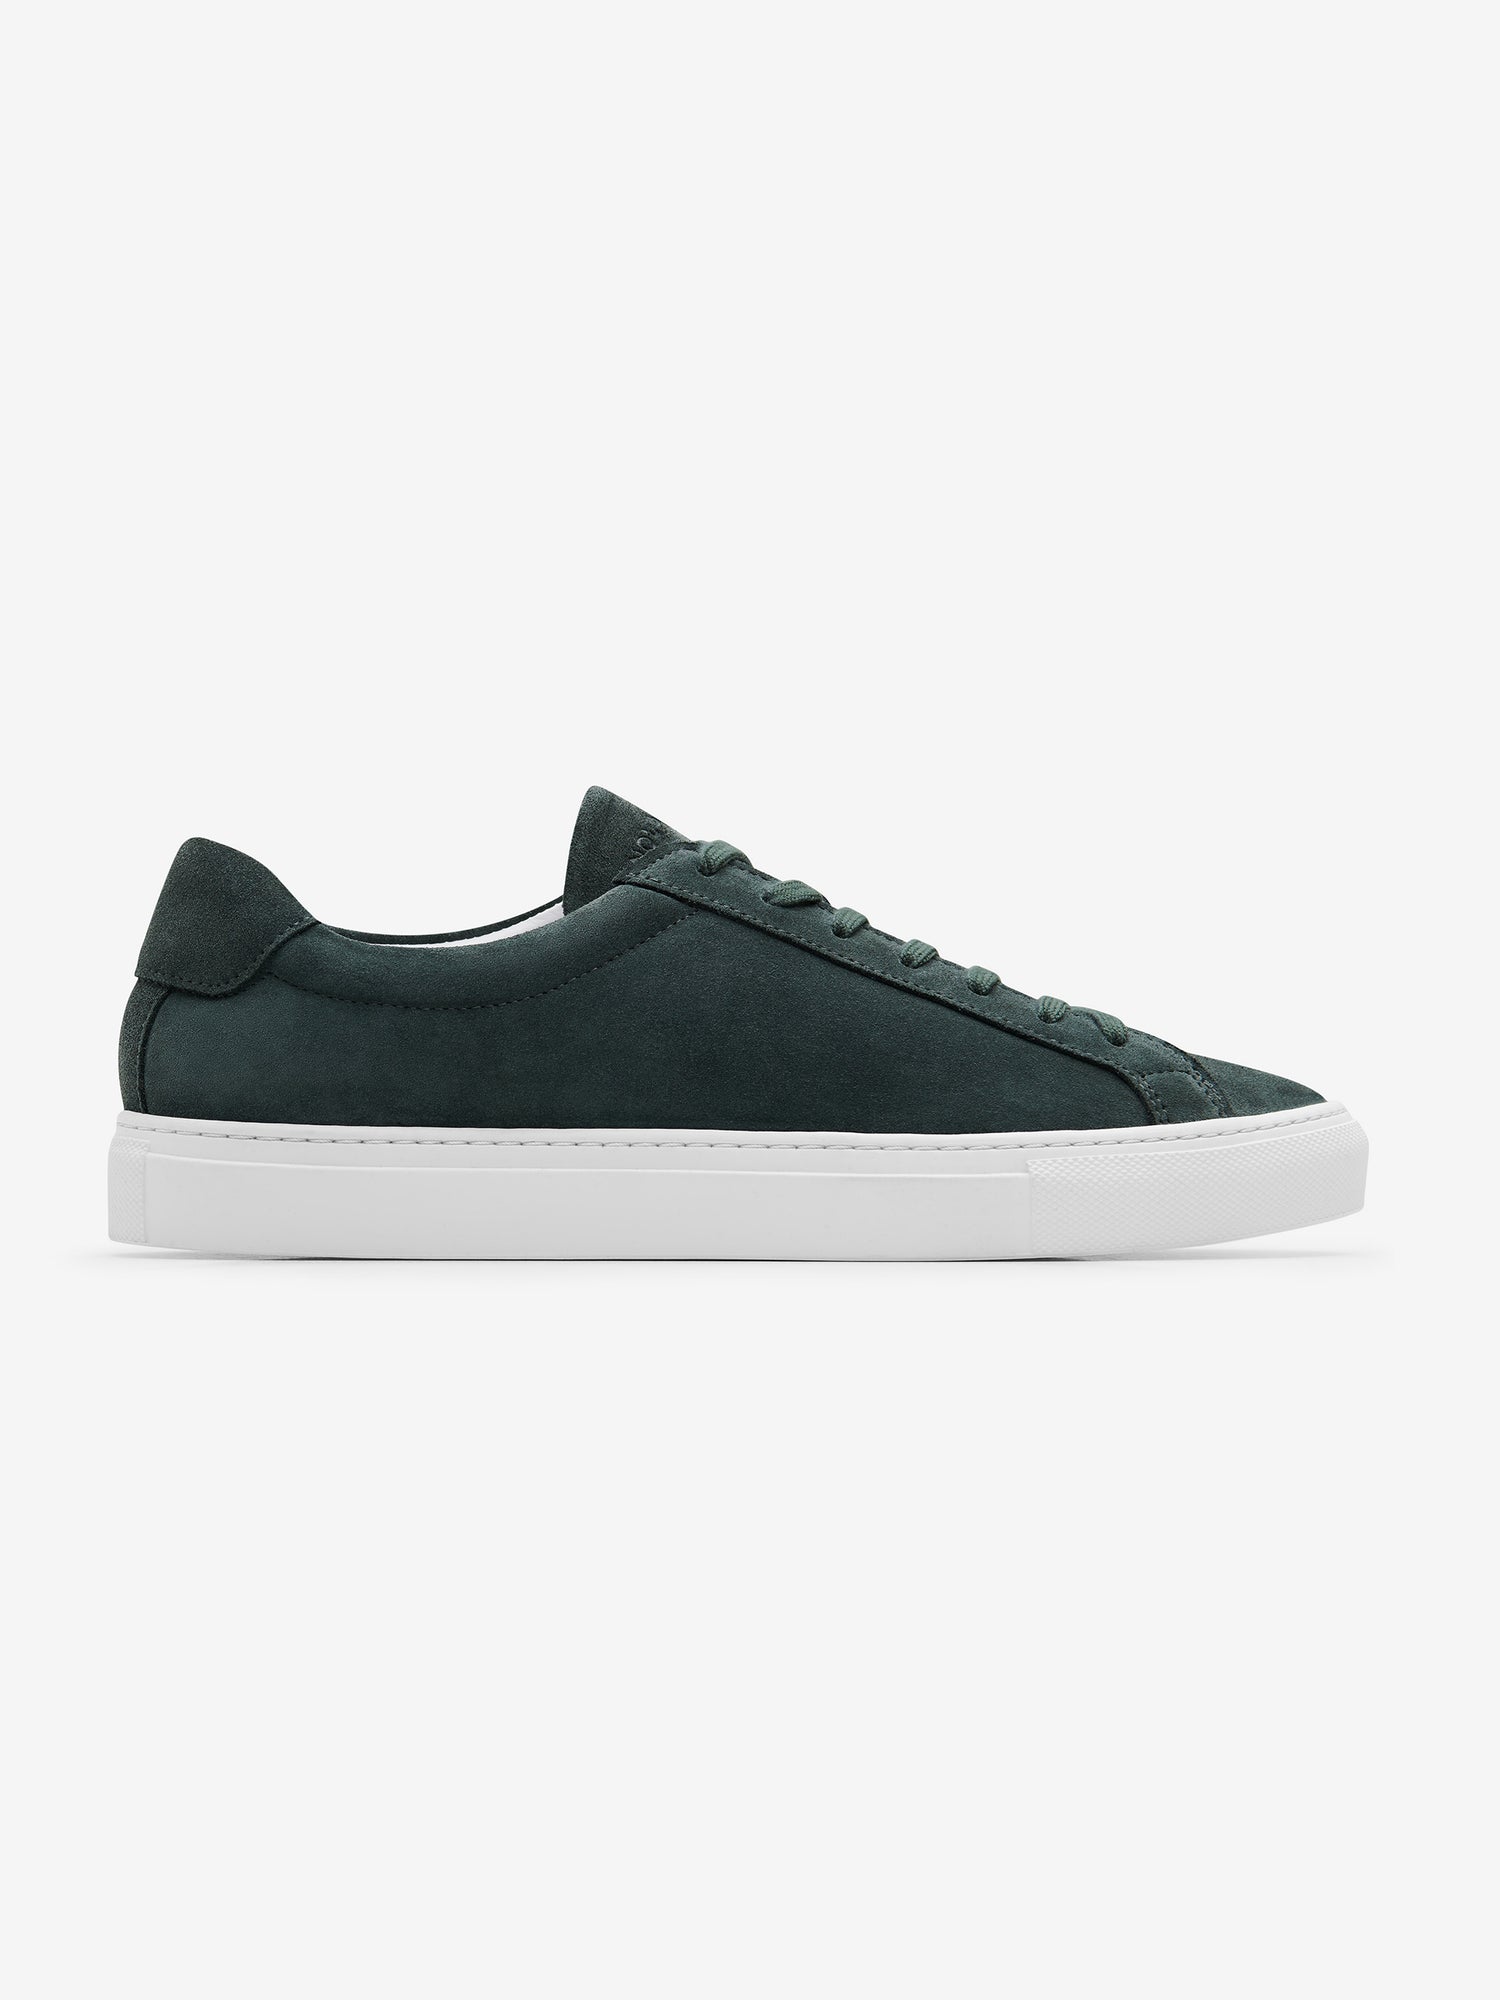 Dundee Suede FW00071-DGN